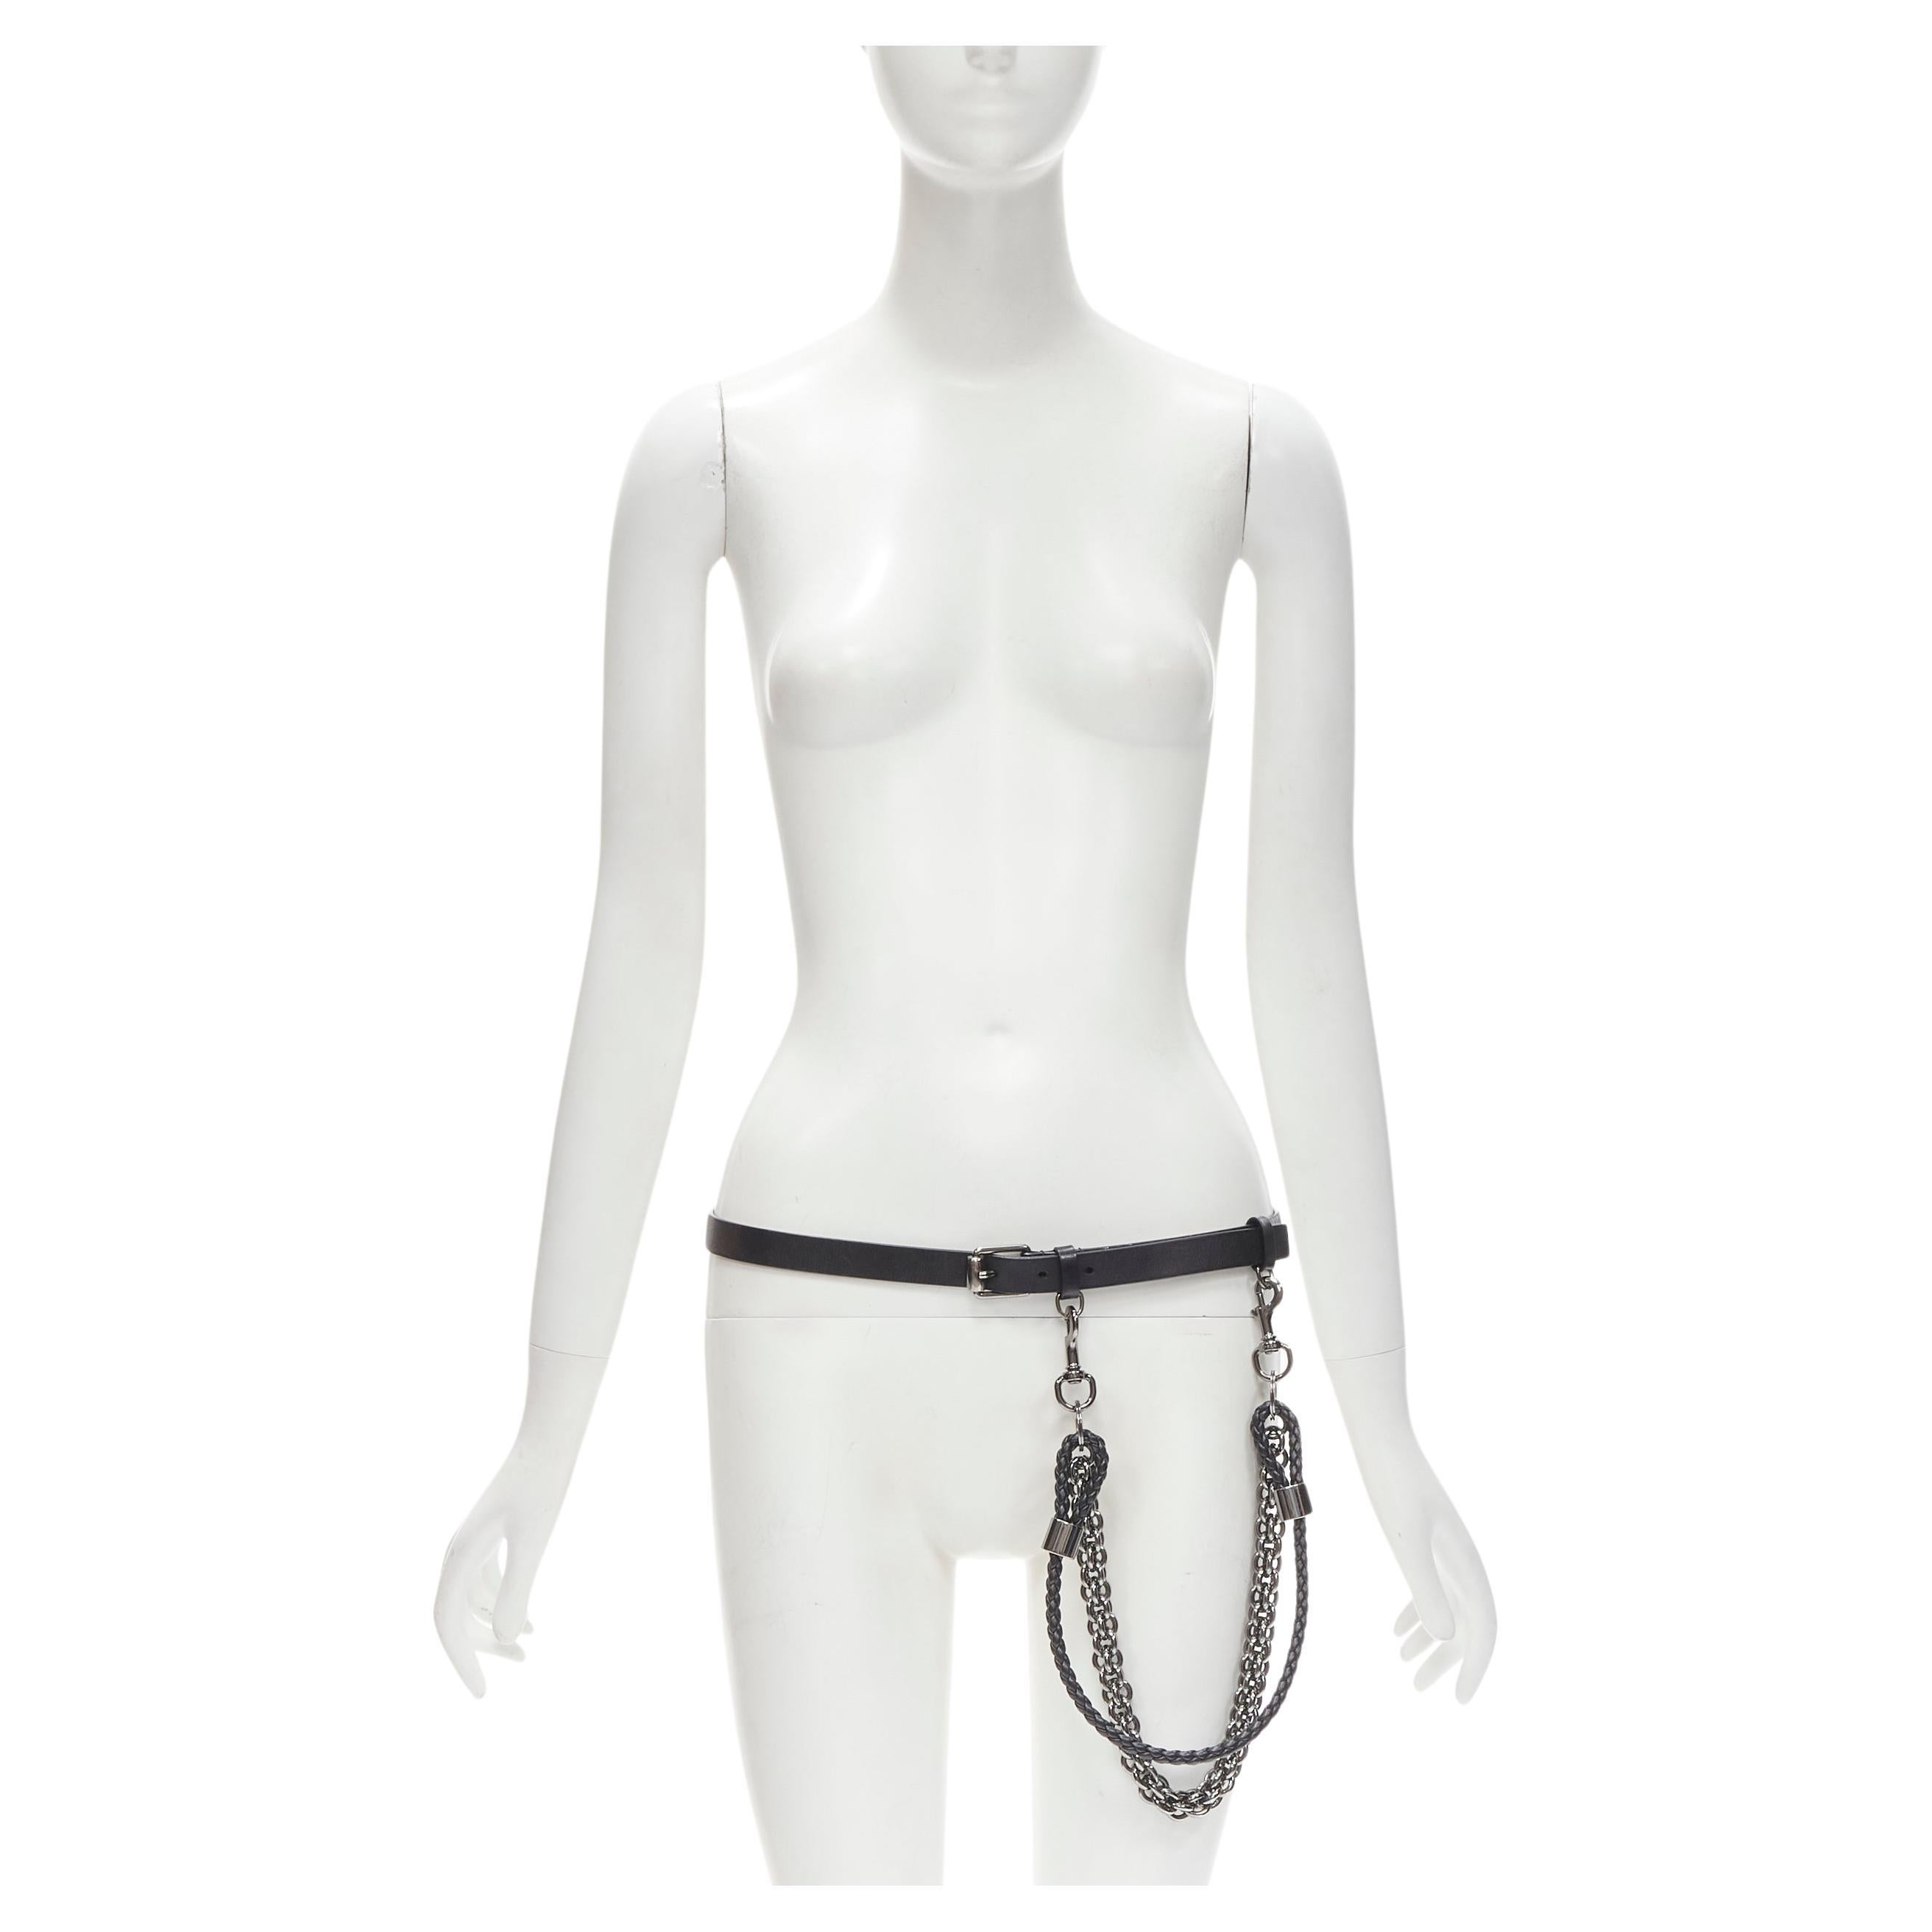 GUCCI black leather braided leather metal link chain skinny belt 85cm